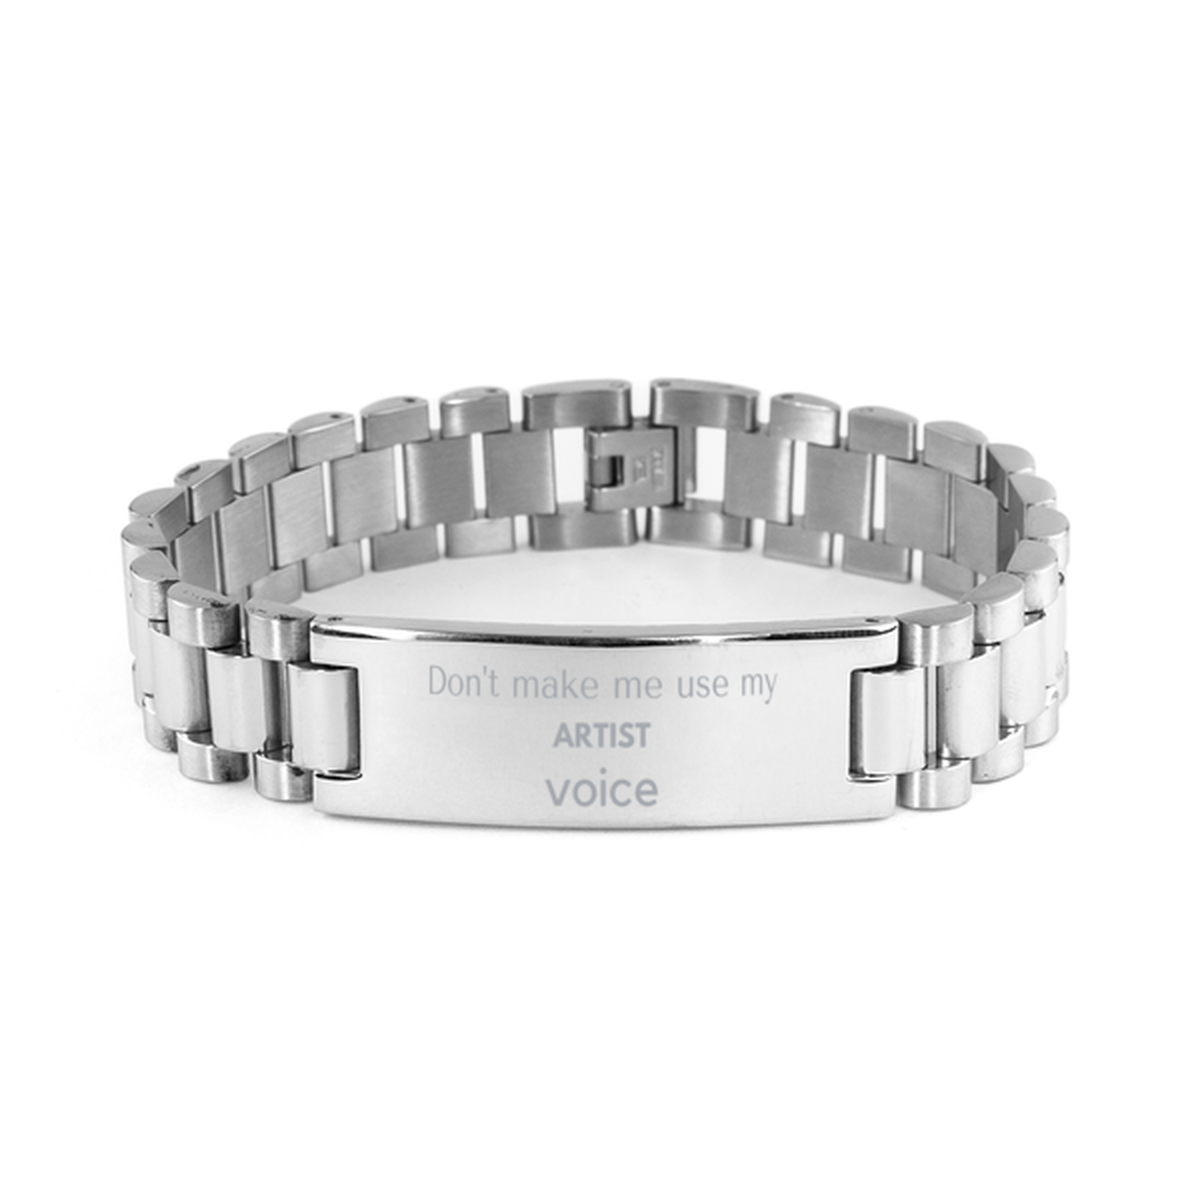 Don't make me use my Artist voice, Sarcasm Artist Gifts, Christmas Artist Ladder Stainless Steel Bracelet Birthday Unique Gifts For Artist Coworkers, Men, Women, Colleague, Friends